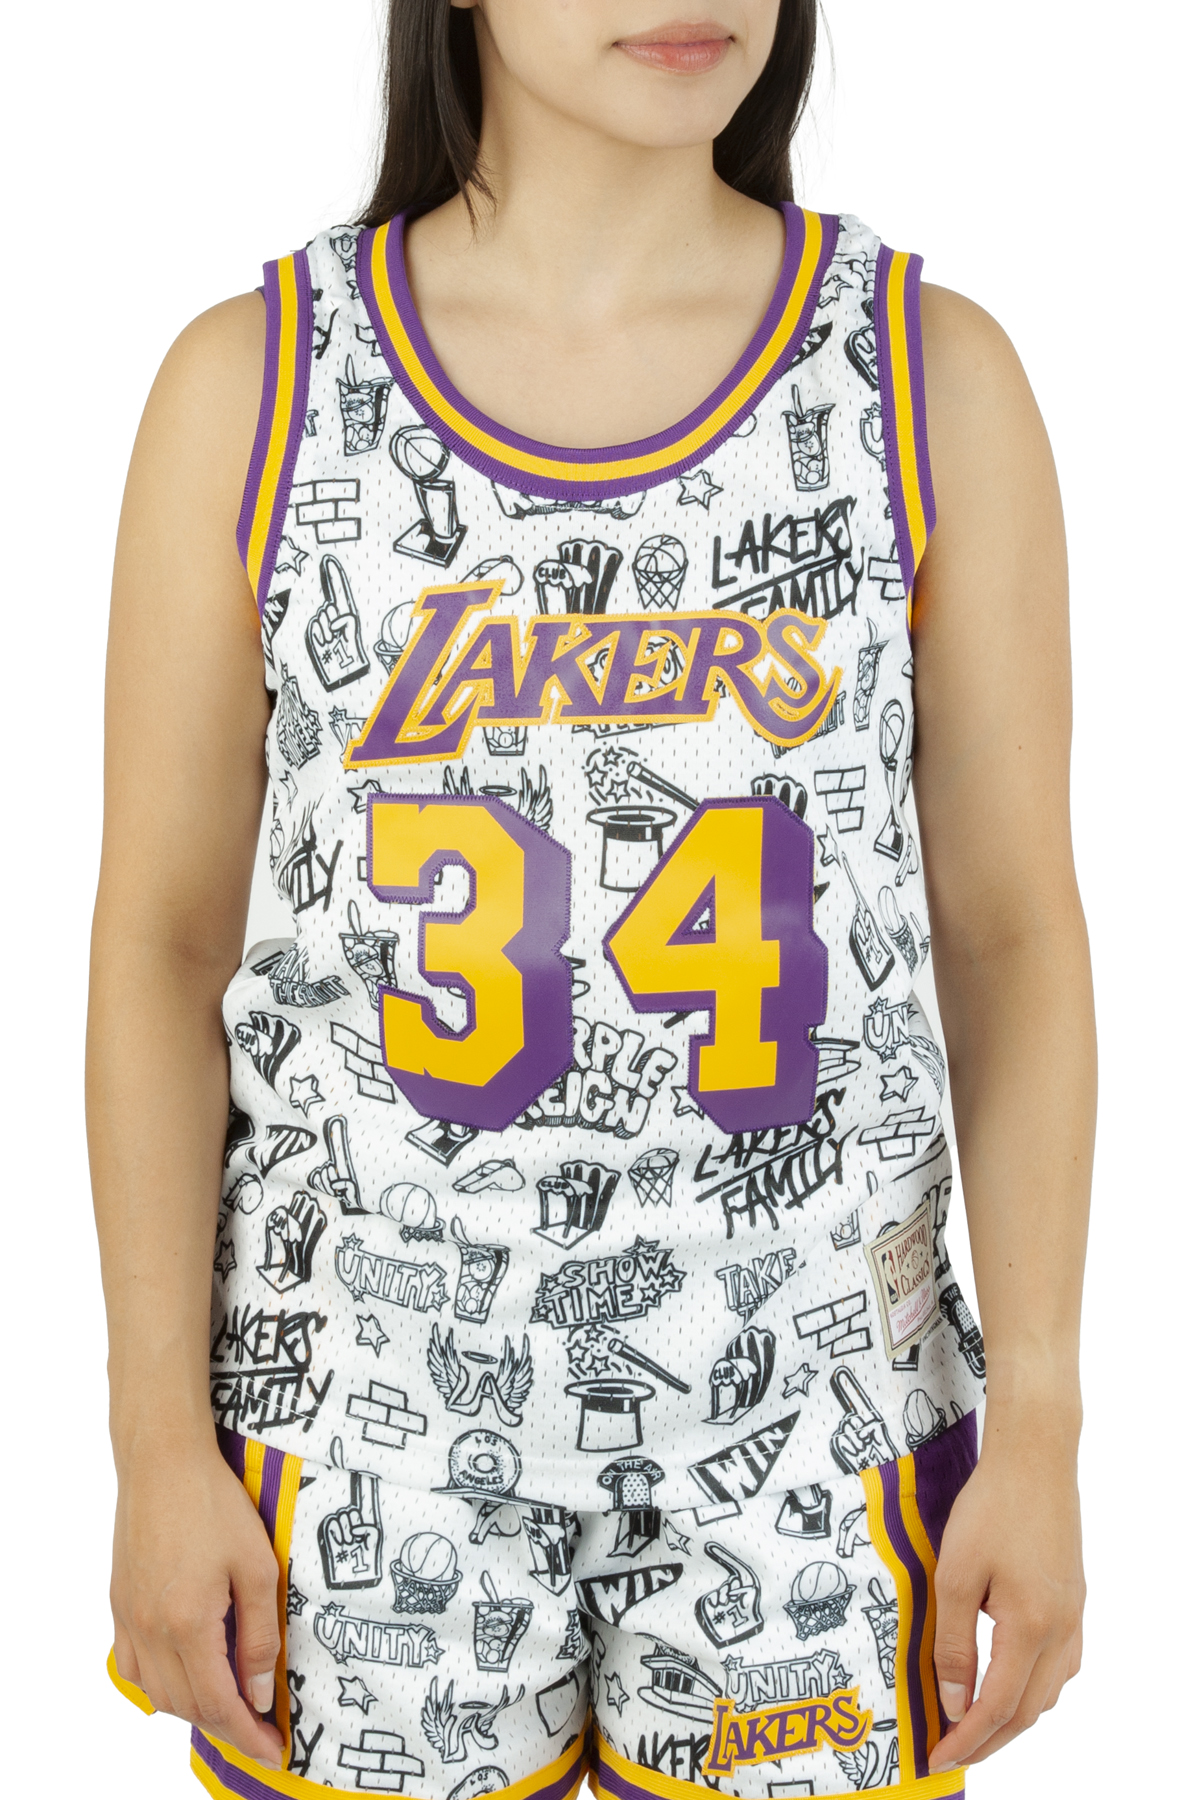 Mitchell & Ness Los Angeles Lakers Swingman Jersey - Shaquille O'Neal M